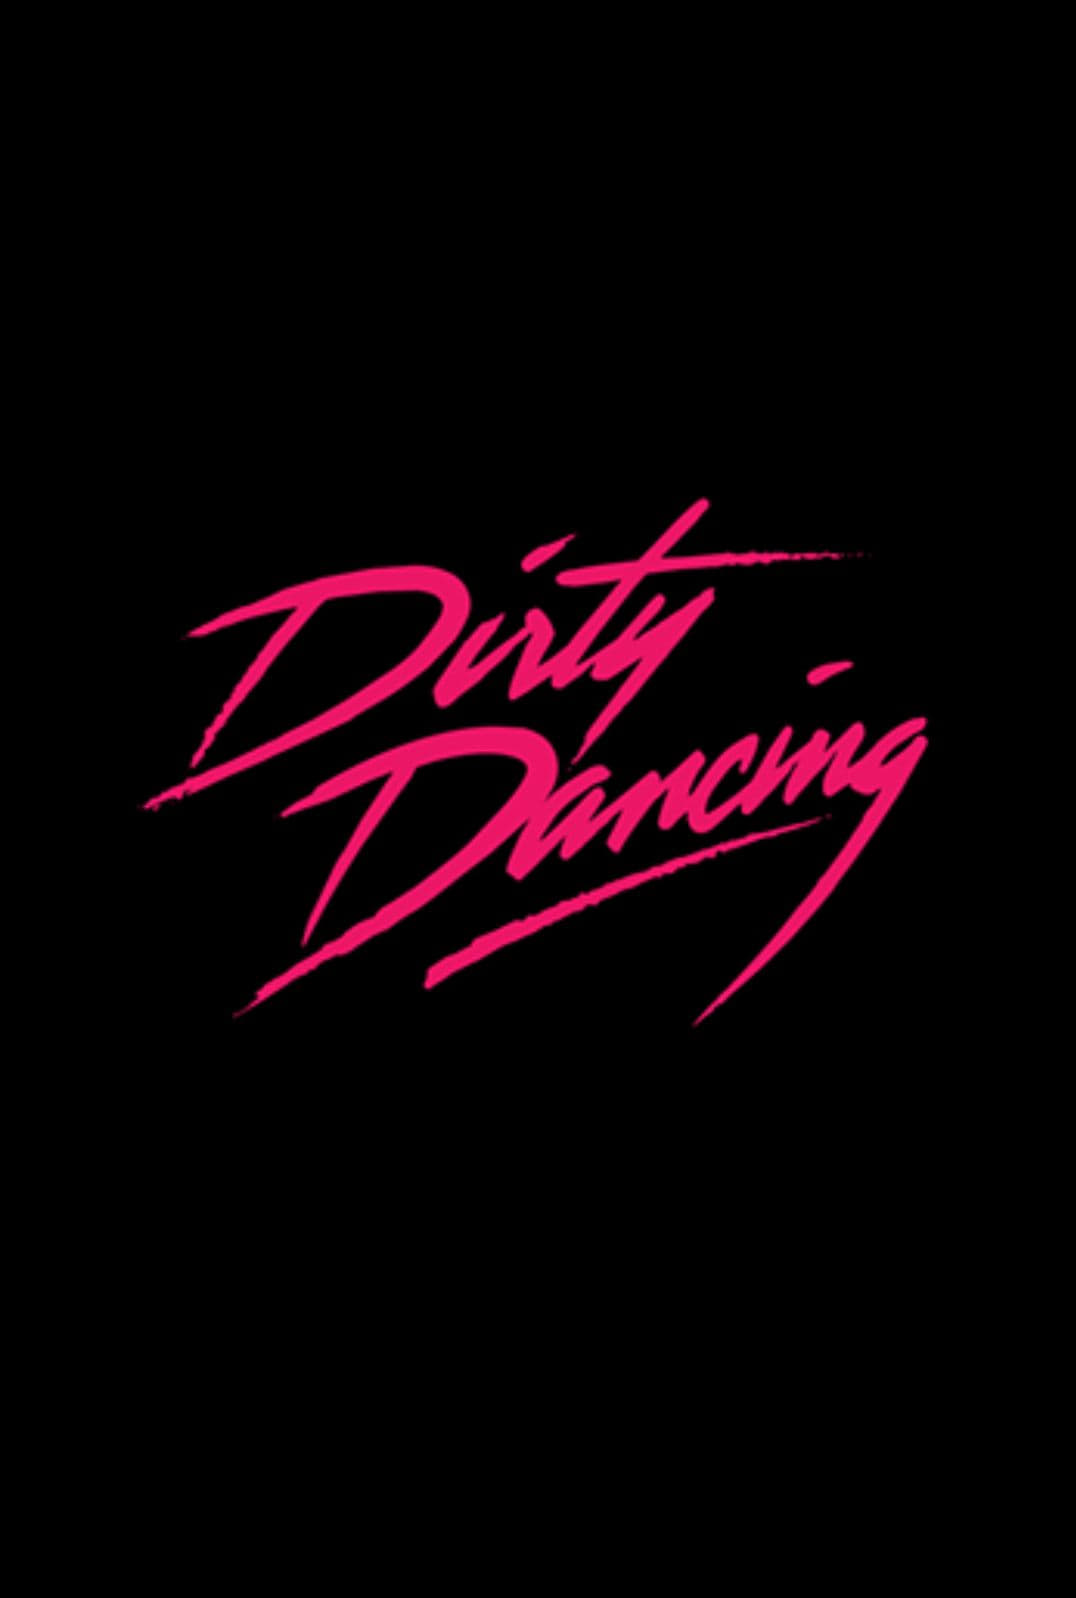 Untitled Dirty Dancing Sequel